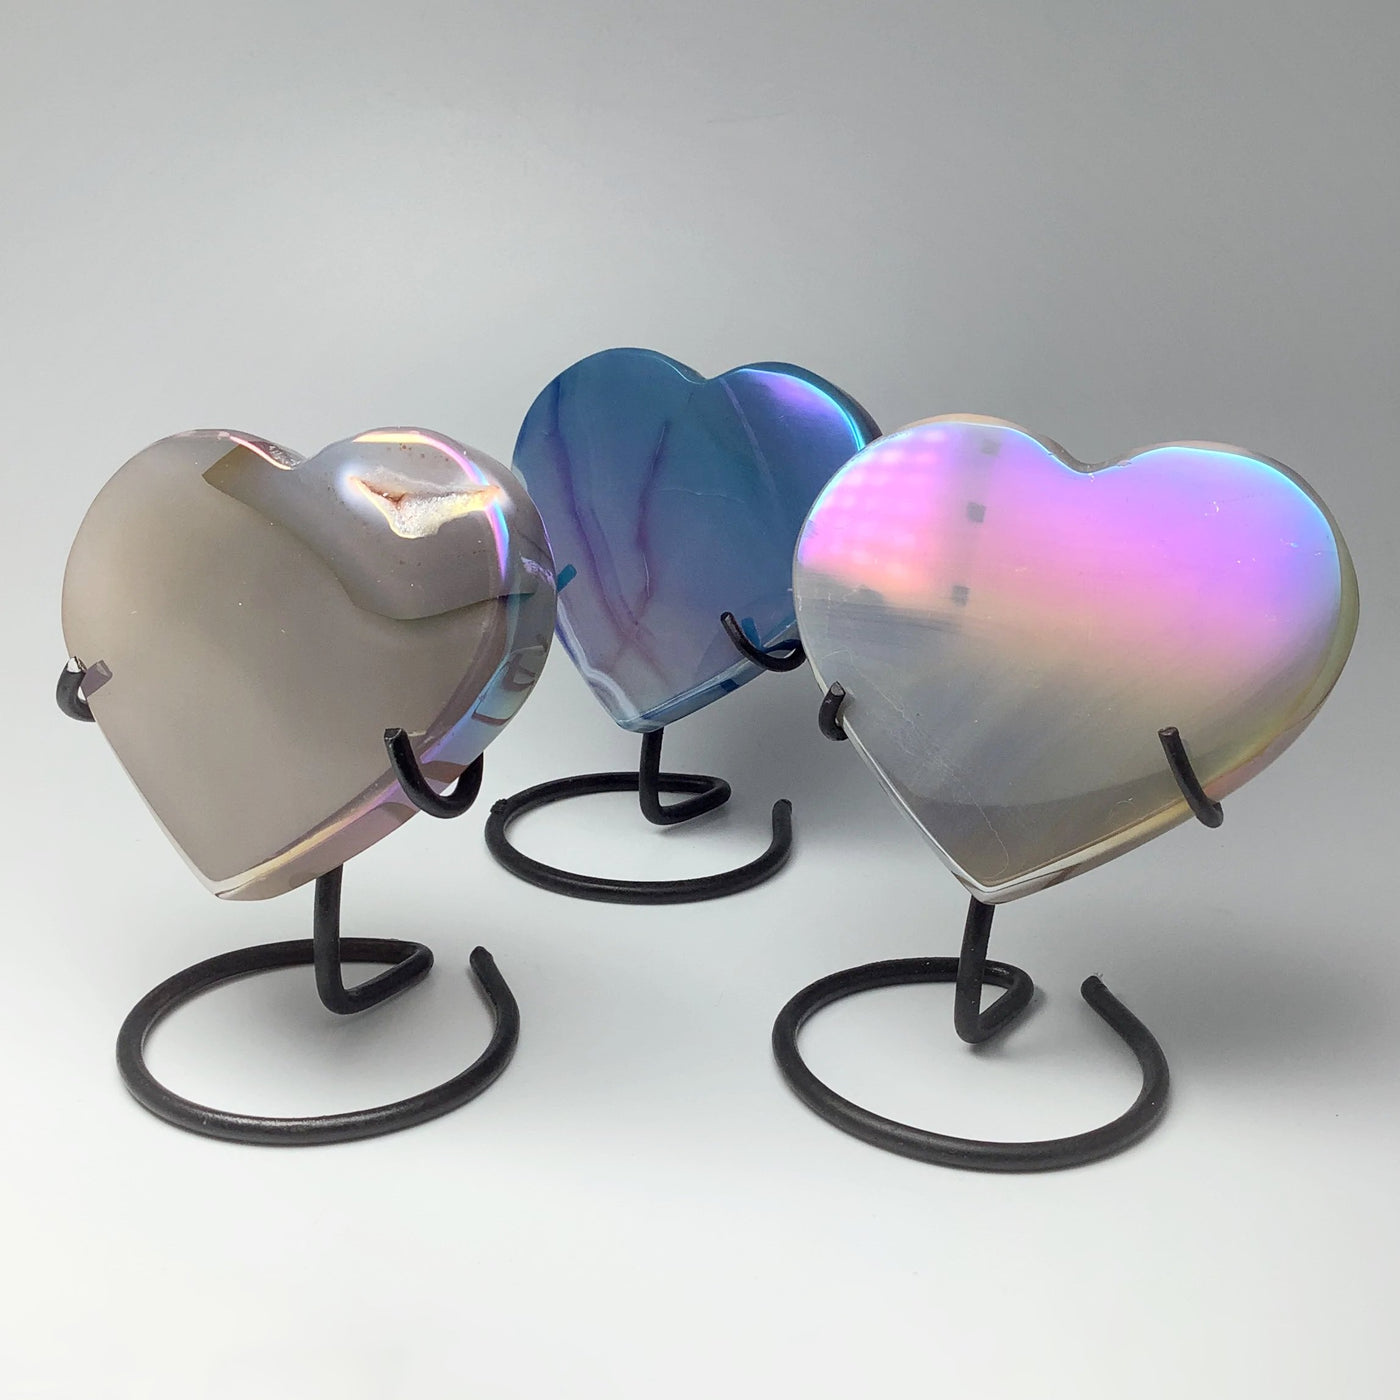 Rainbow Agate Heart on Stand at $55 Each